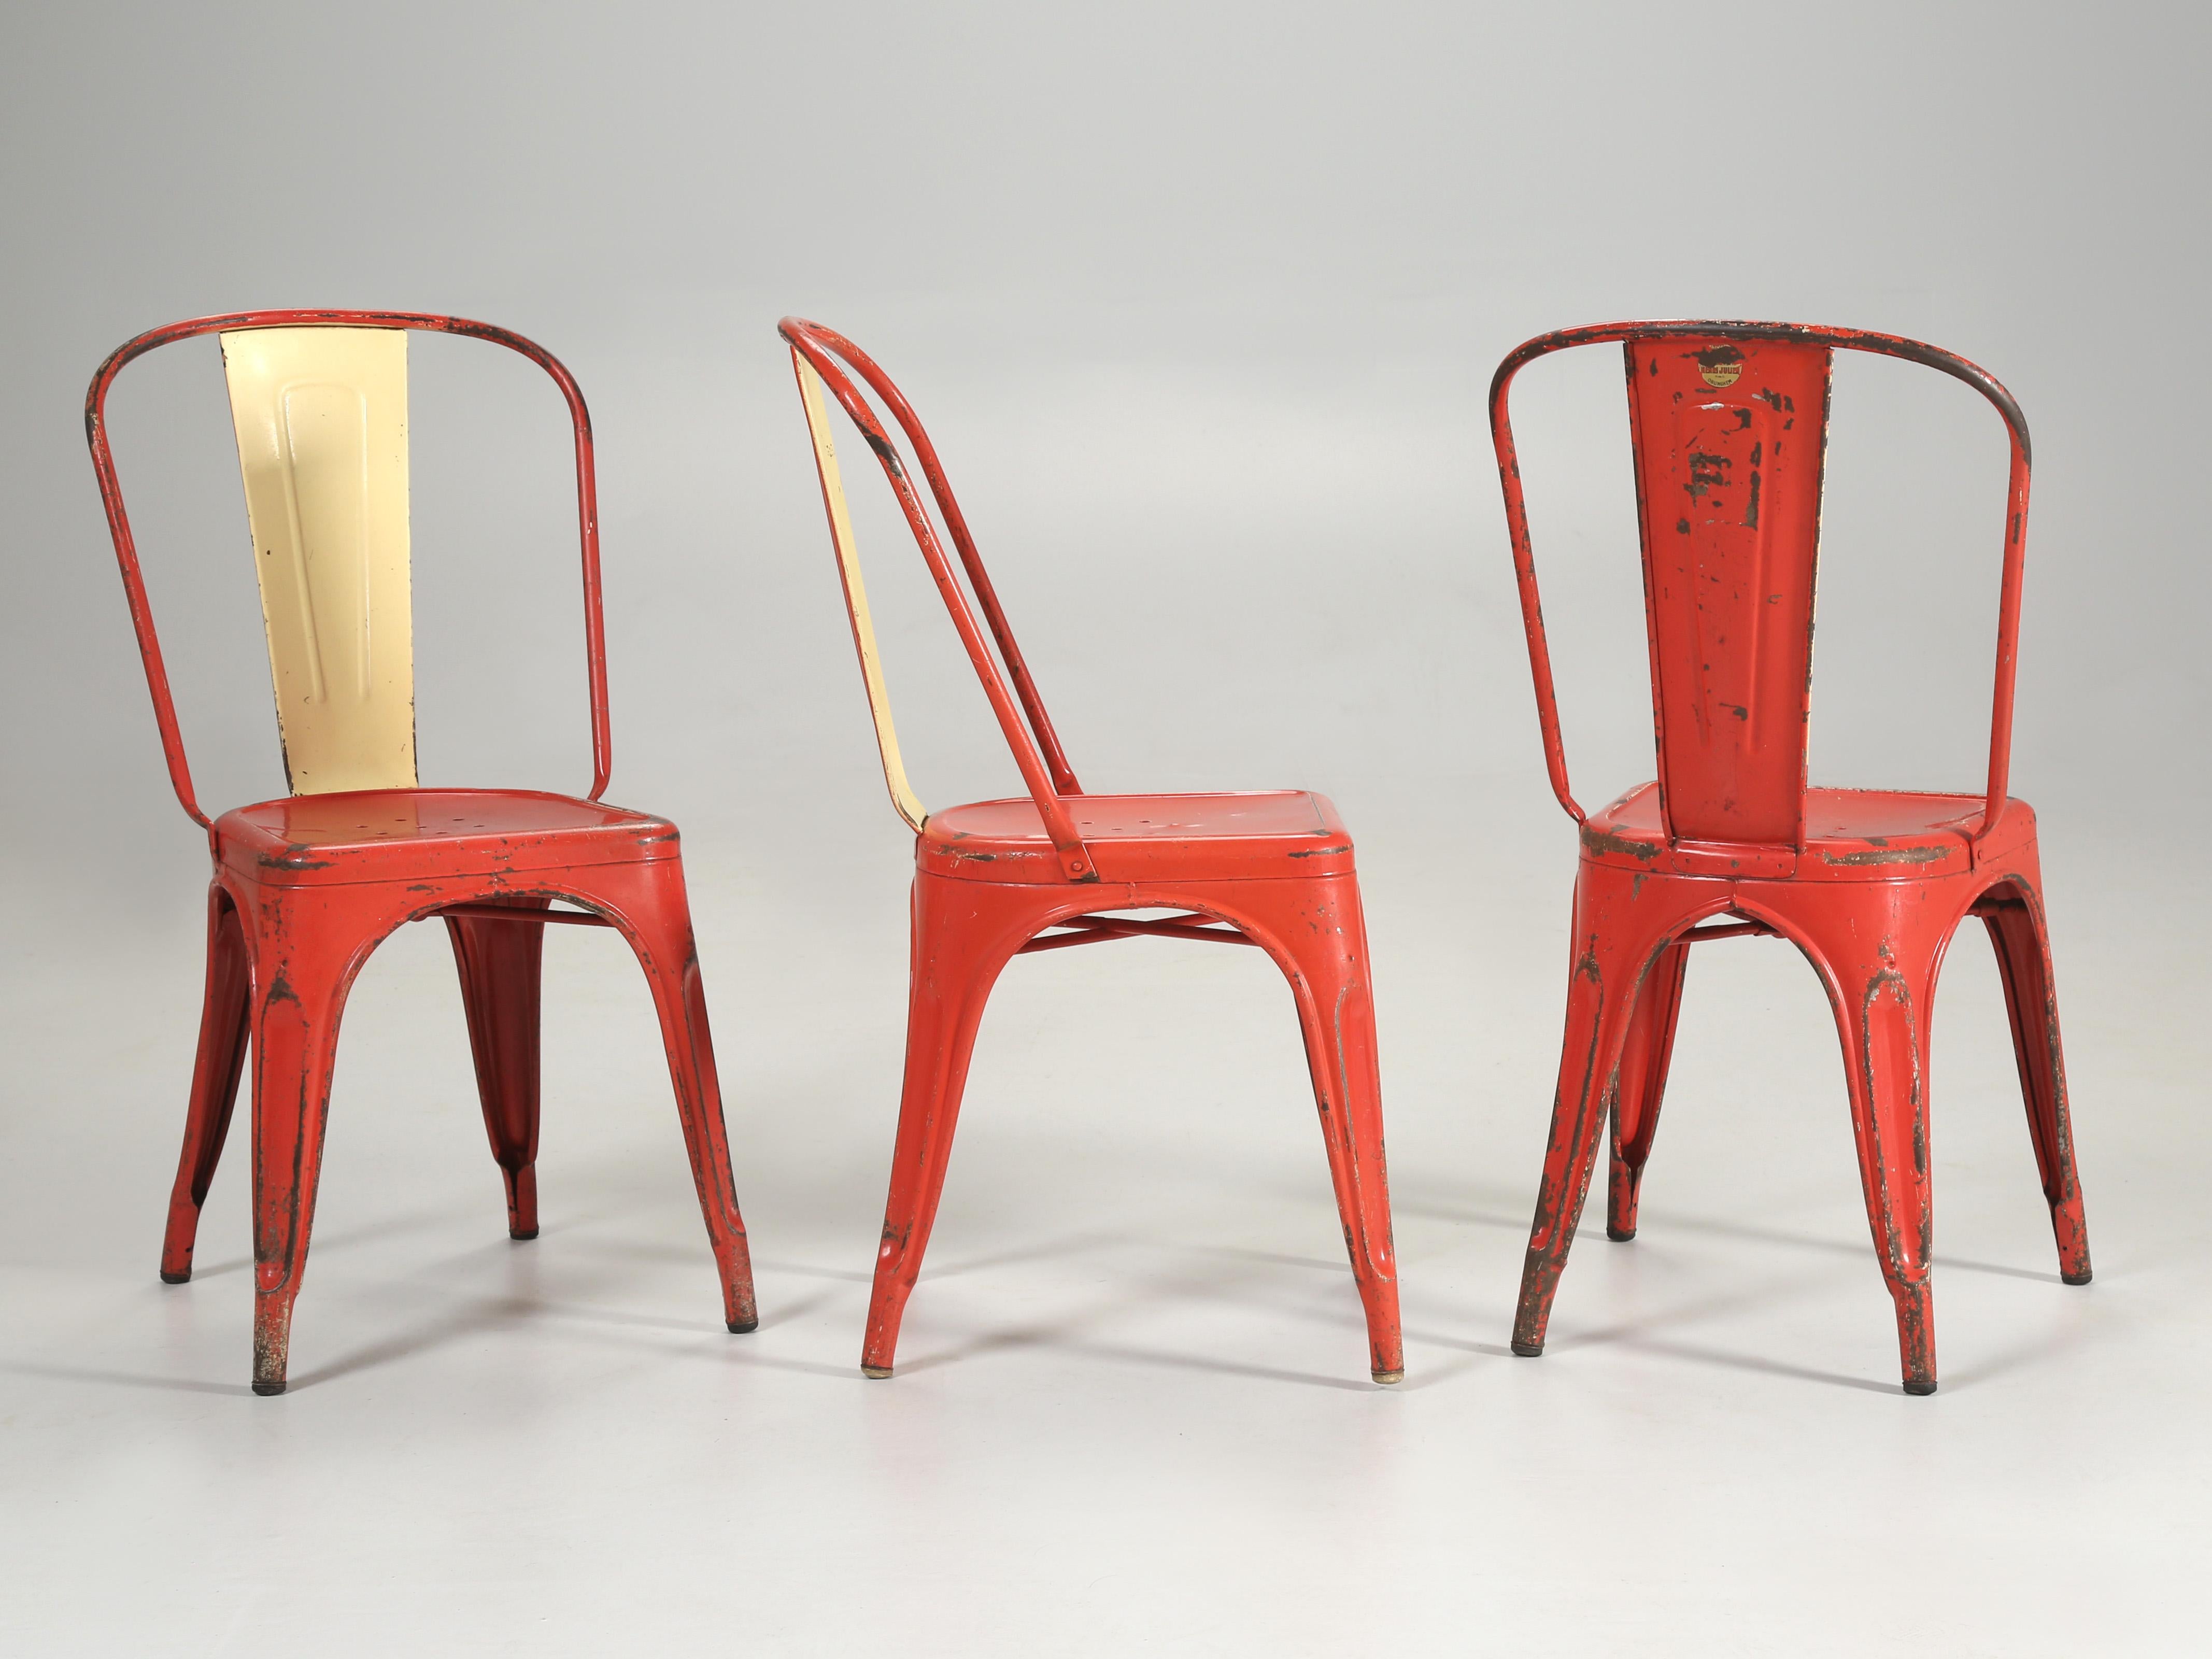 Authentic hand-made Tolix chairs, complete with the gold TOLIX label. The Tolix chairs are considered iconic, and have been displayed in the New York Museum of Modern Art, Germany’s Vitra Design Museum, and Paris’s Pompidou Center. Wonderful space